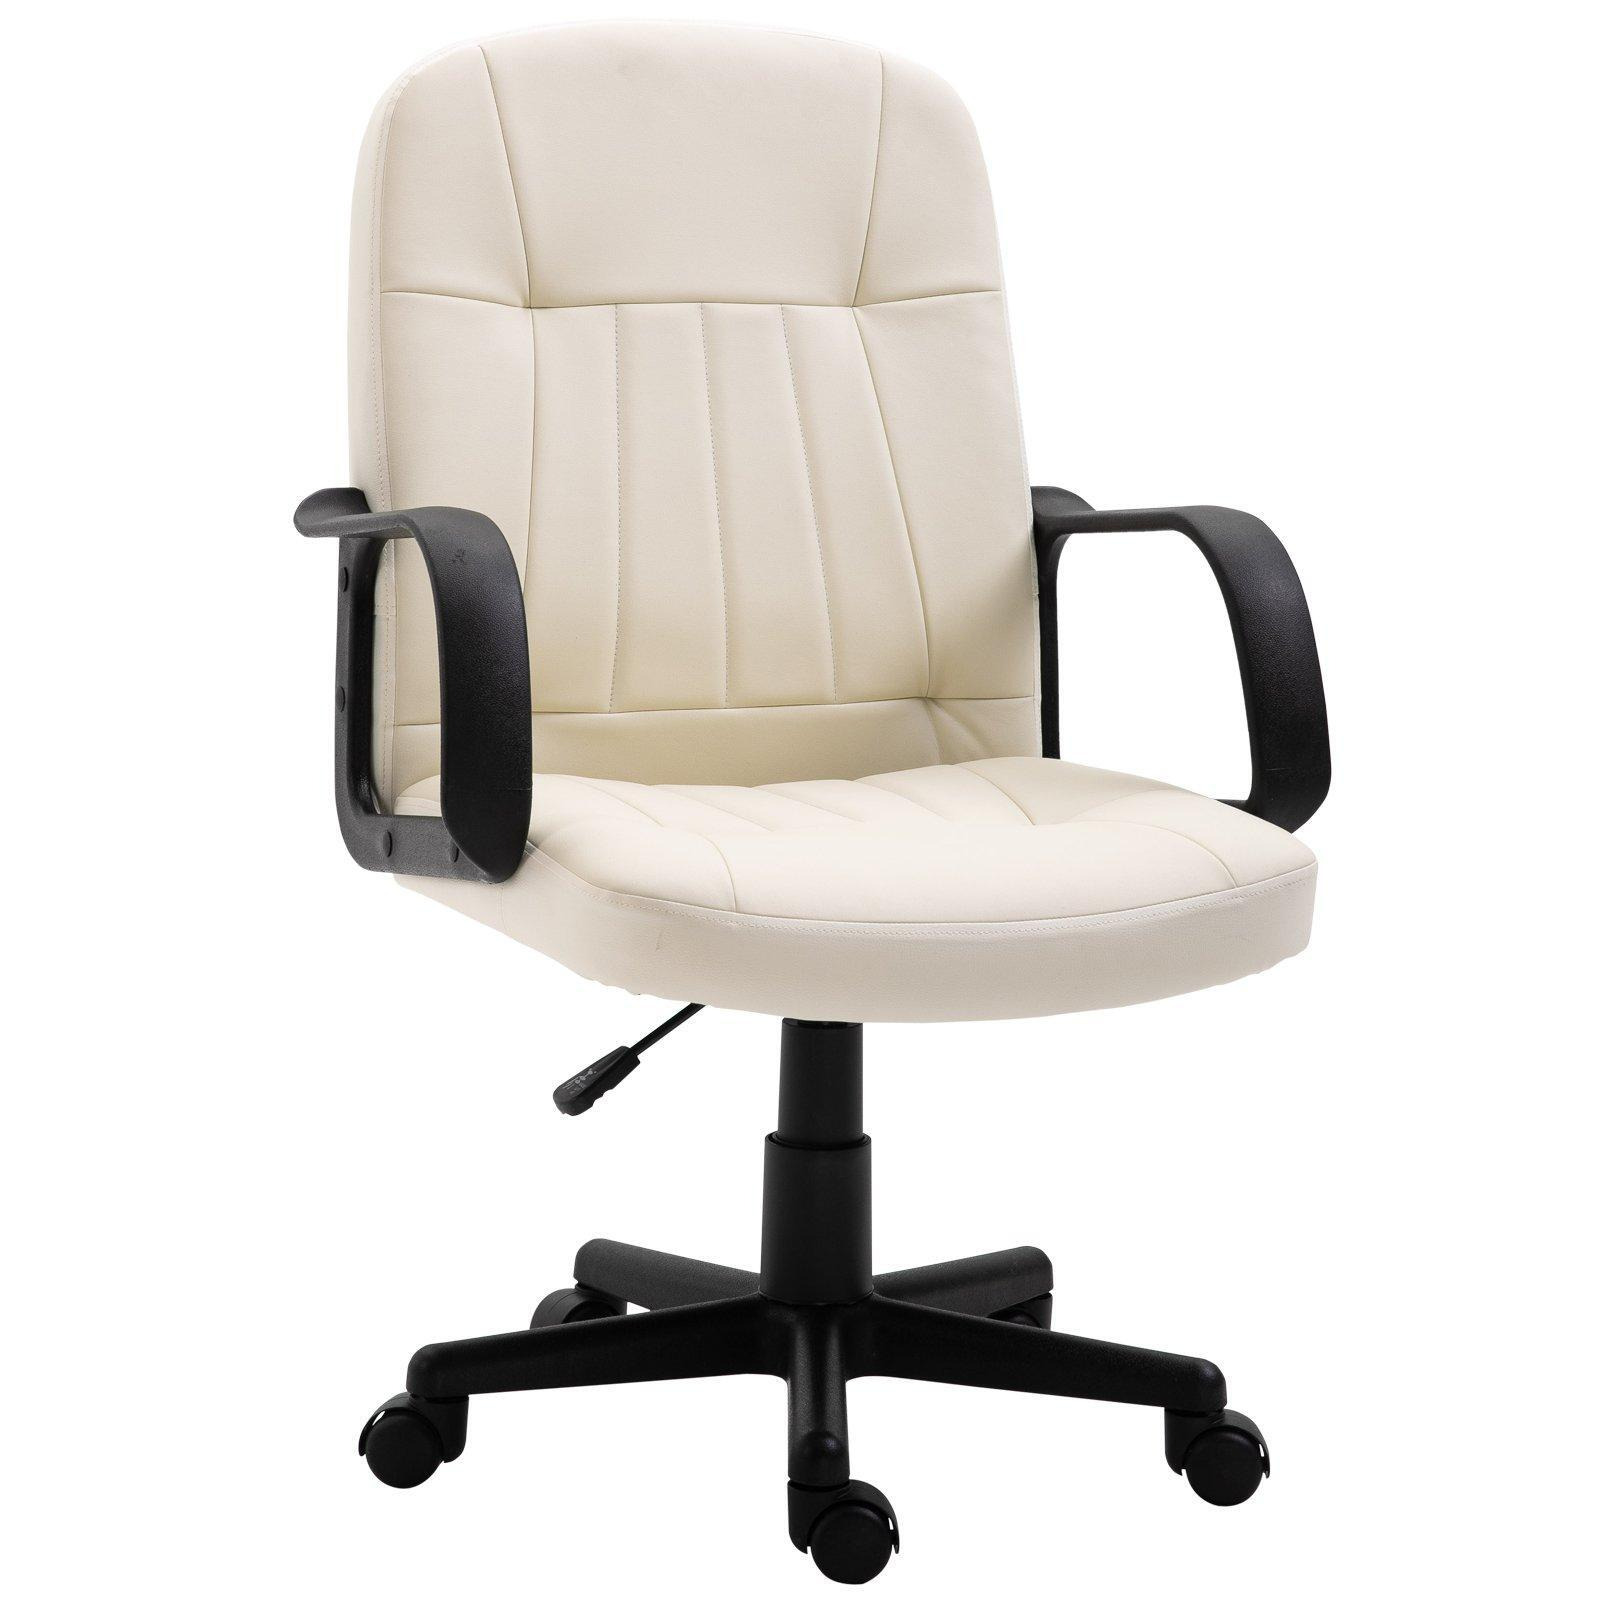 Swivel Executive Chair PU Leather Computer Desk Chair Office - image 1